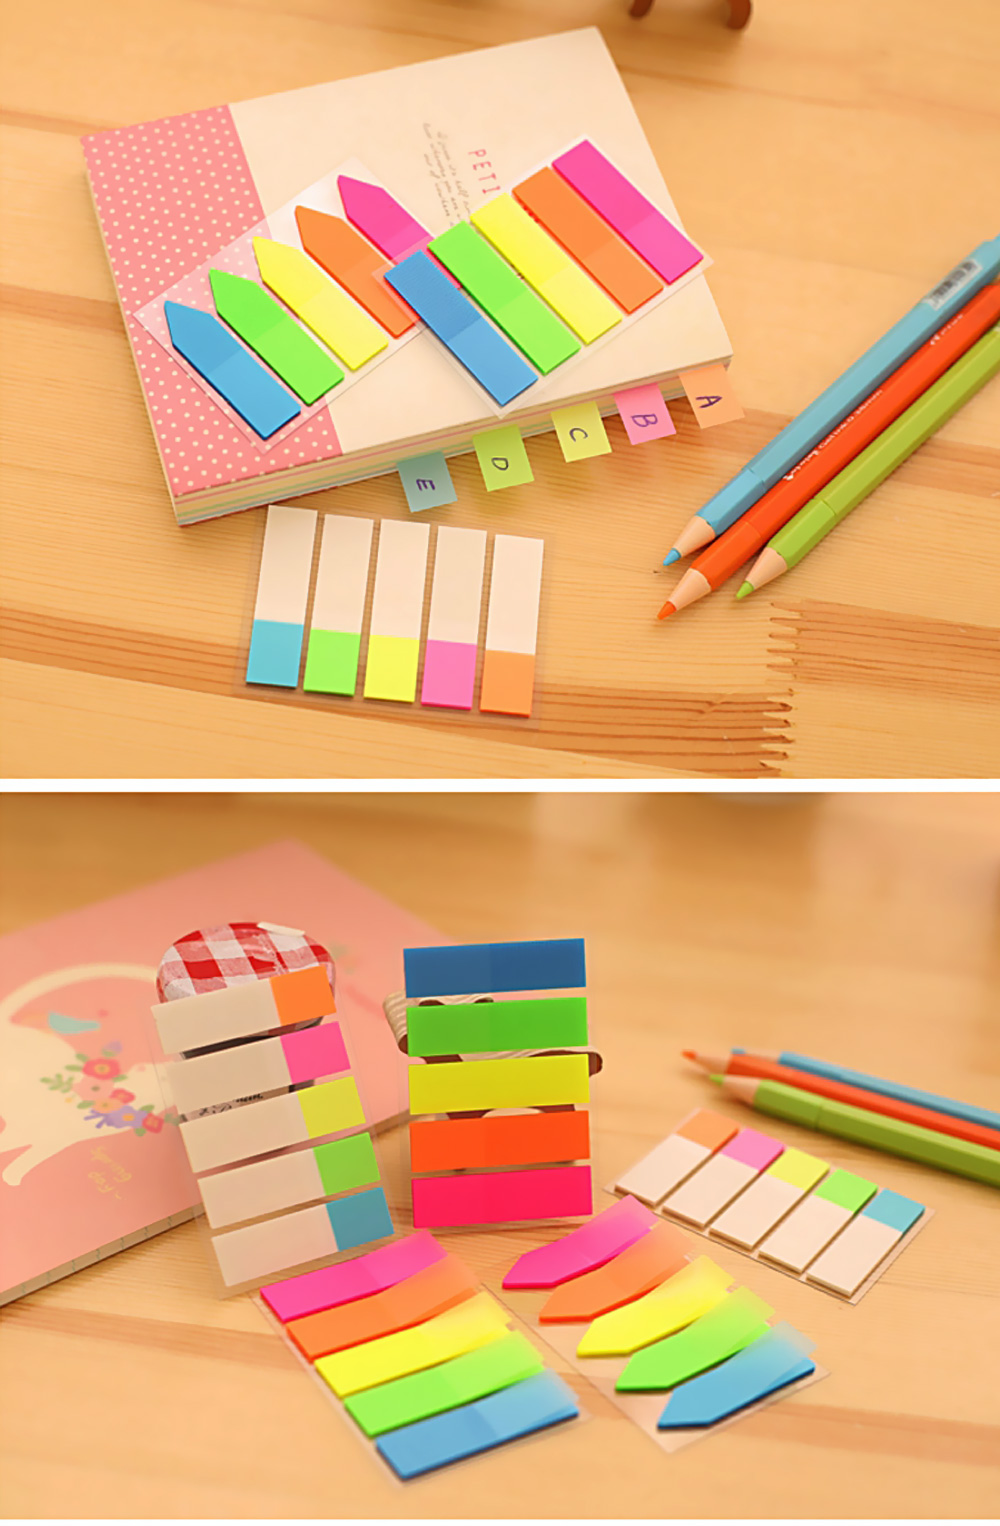 Fluorescent Index Sticker Bookmark Memo Pad Tab Sticky Notes Office School Supplies Stationery